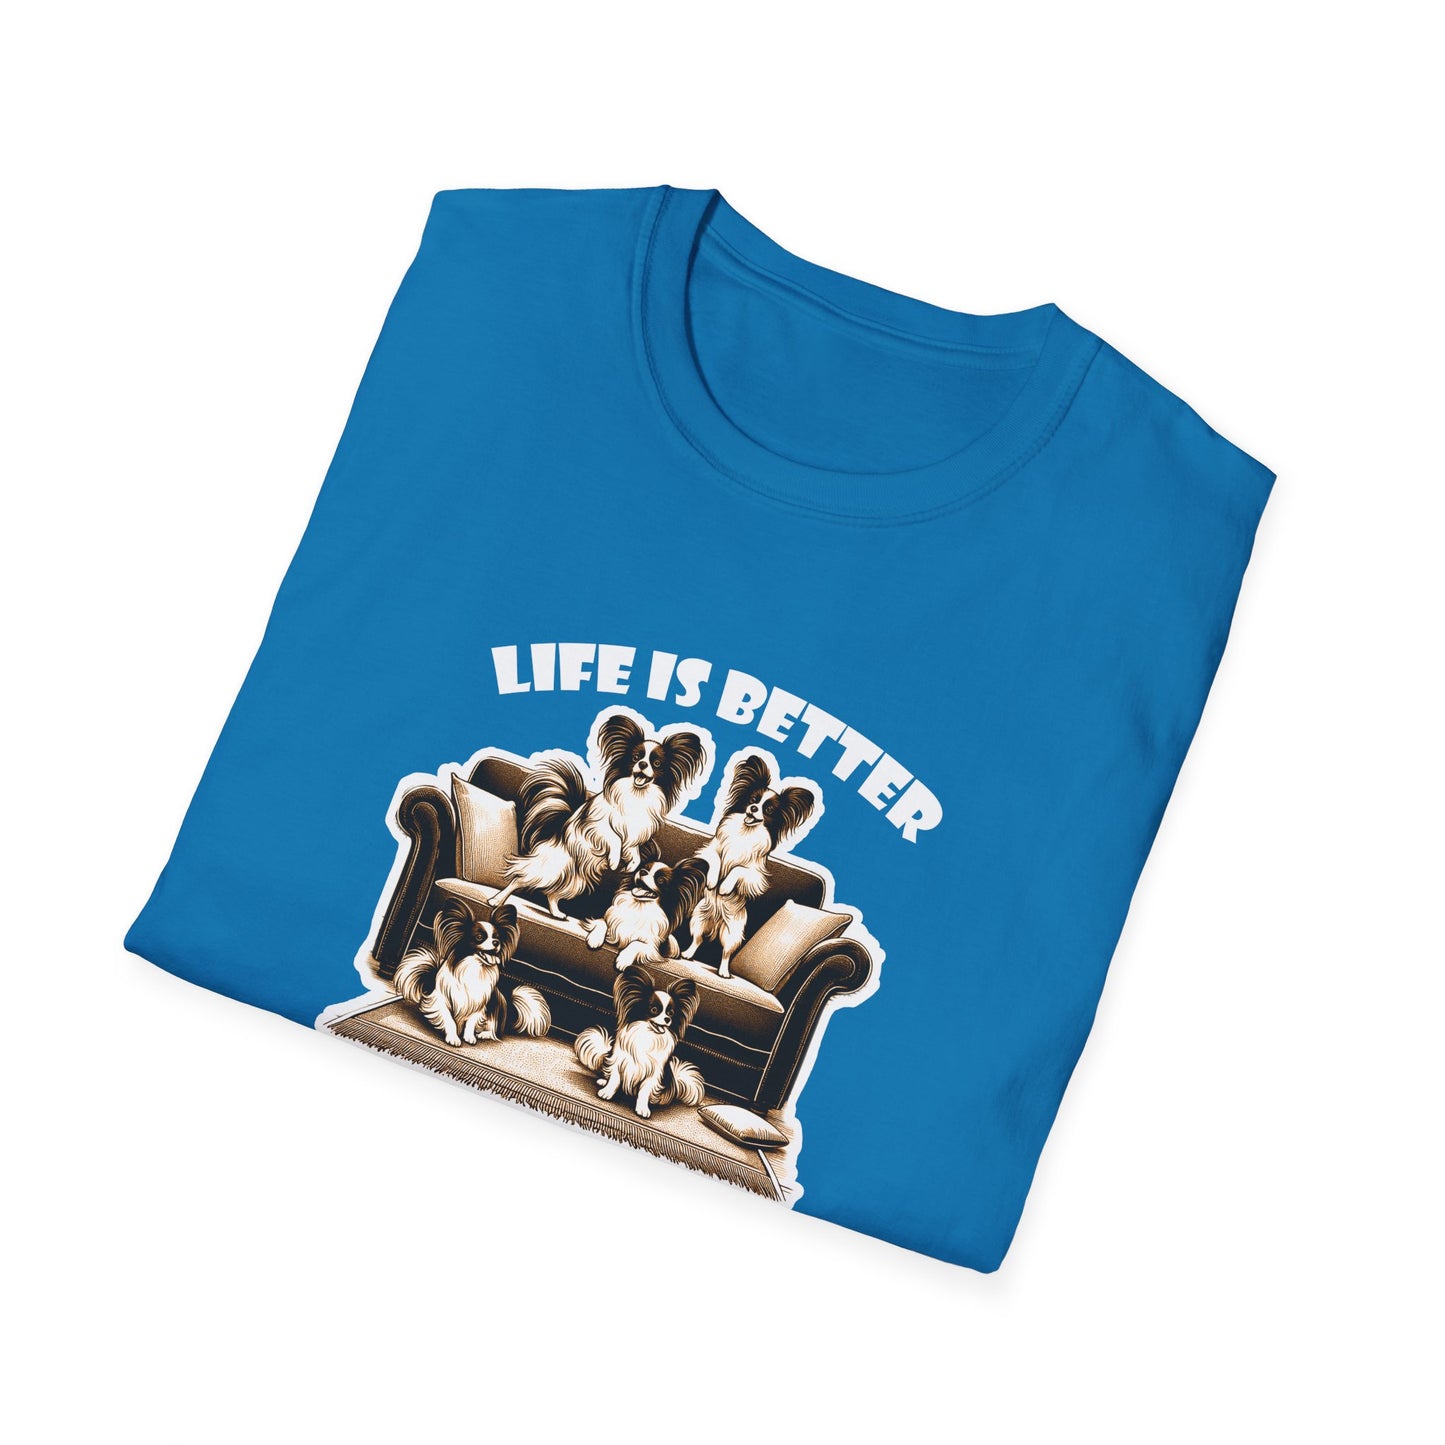 LIFE IS BETTER - Papillons -  Unisex Softstyle T-Shirt